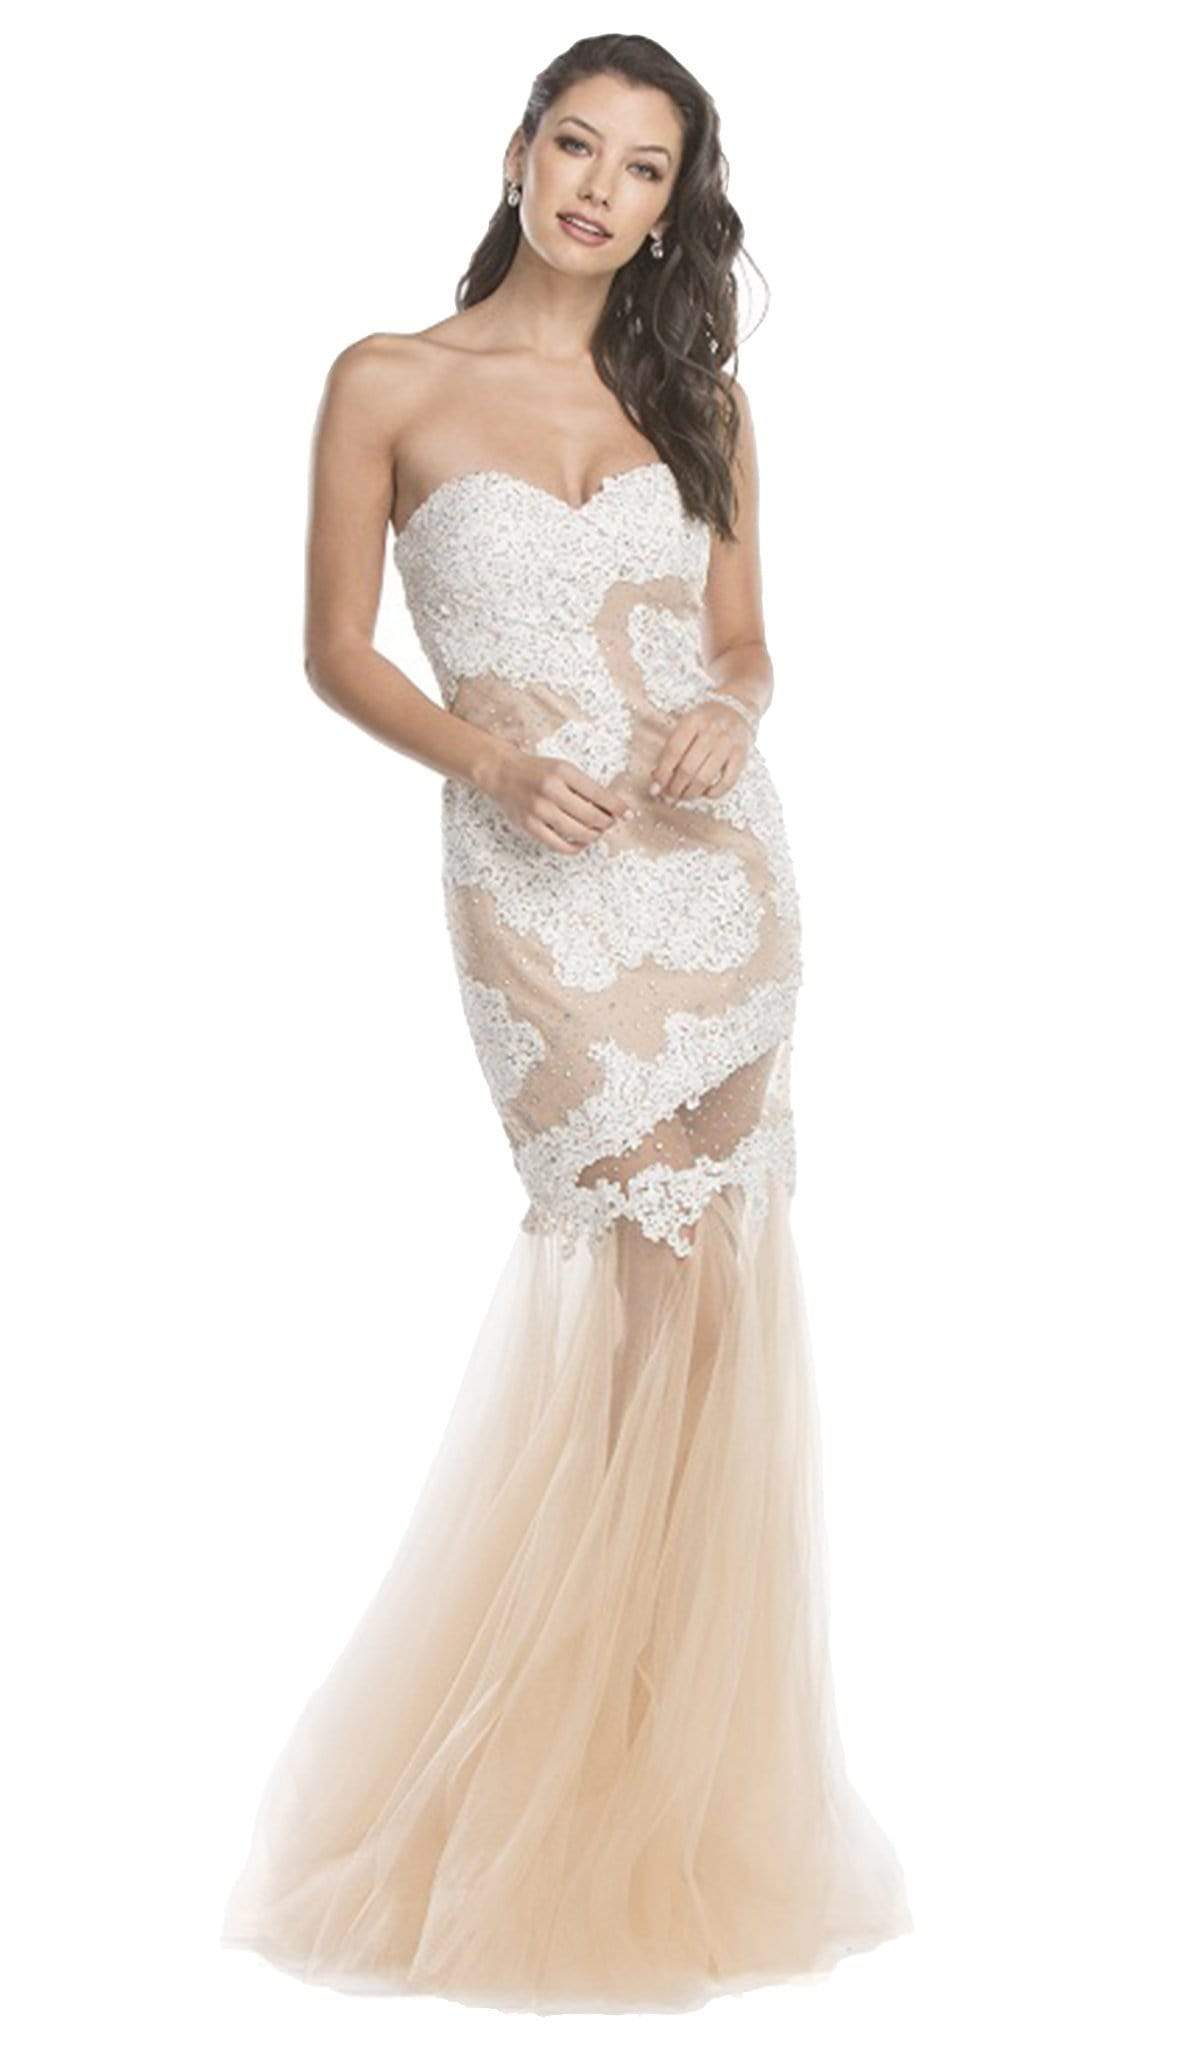 Aspeed Design - Strapless Embellished Fitted Prom Dress
